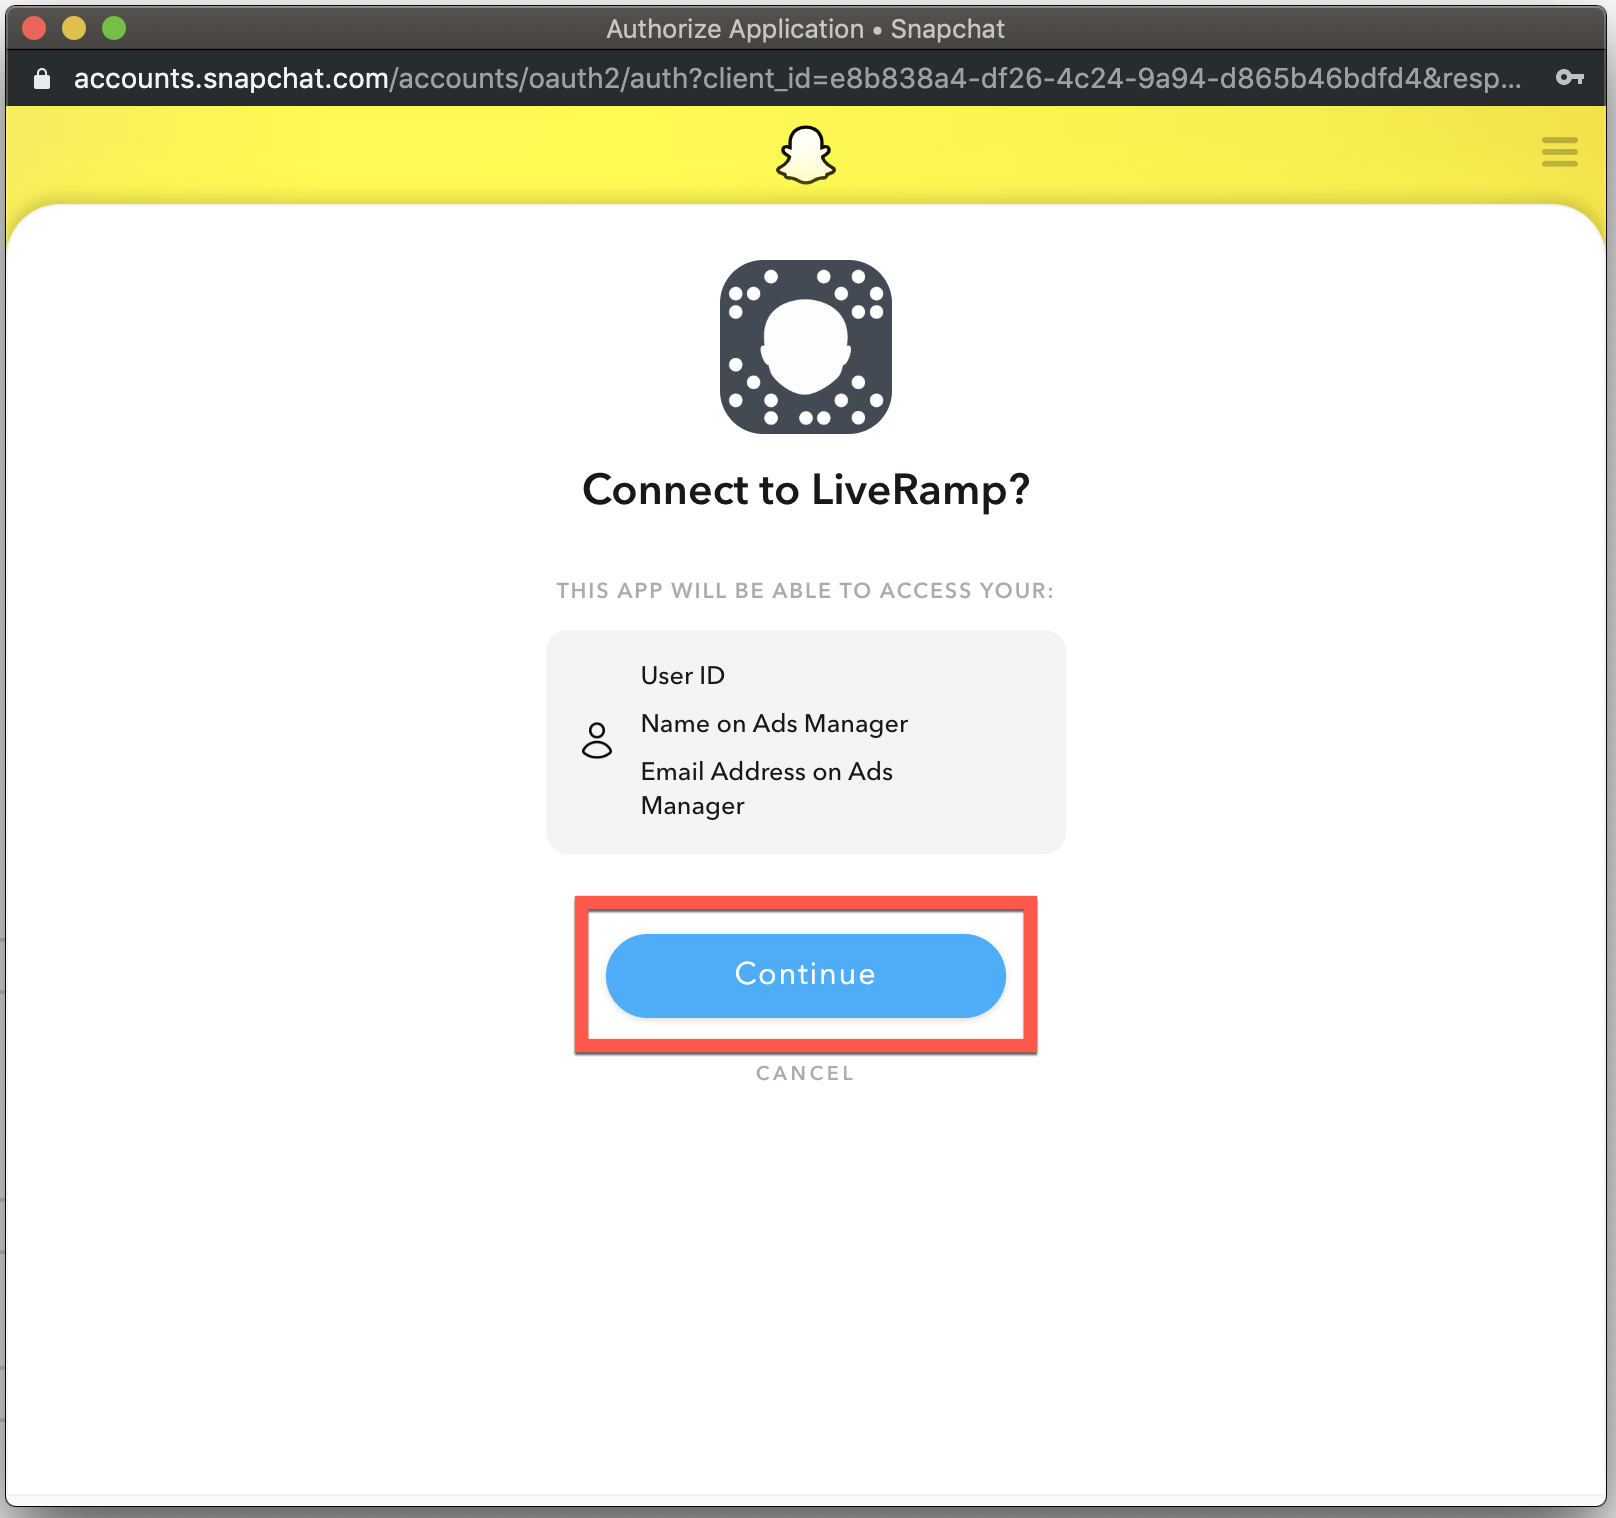 C-Authorize_DA_with_OAuth-Snapchat_confirmation_screen.jpg